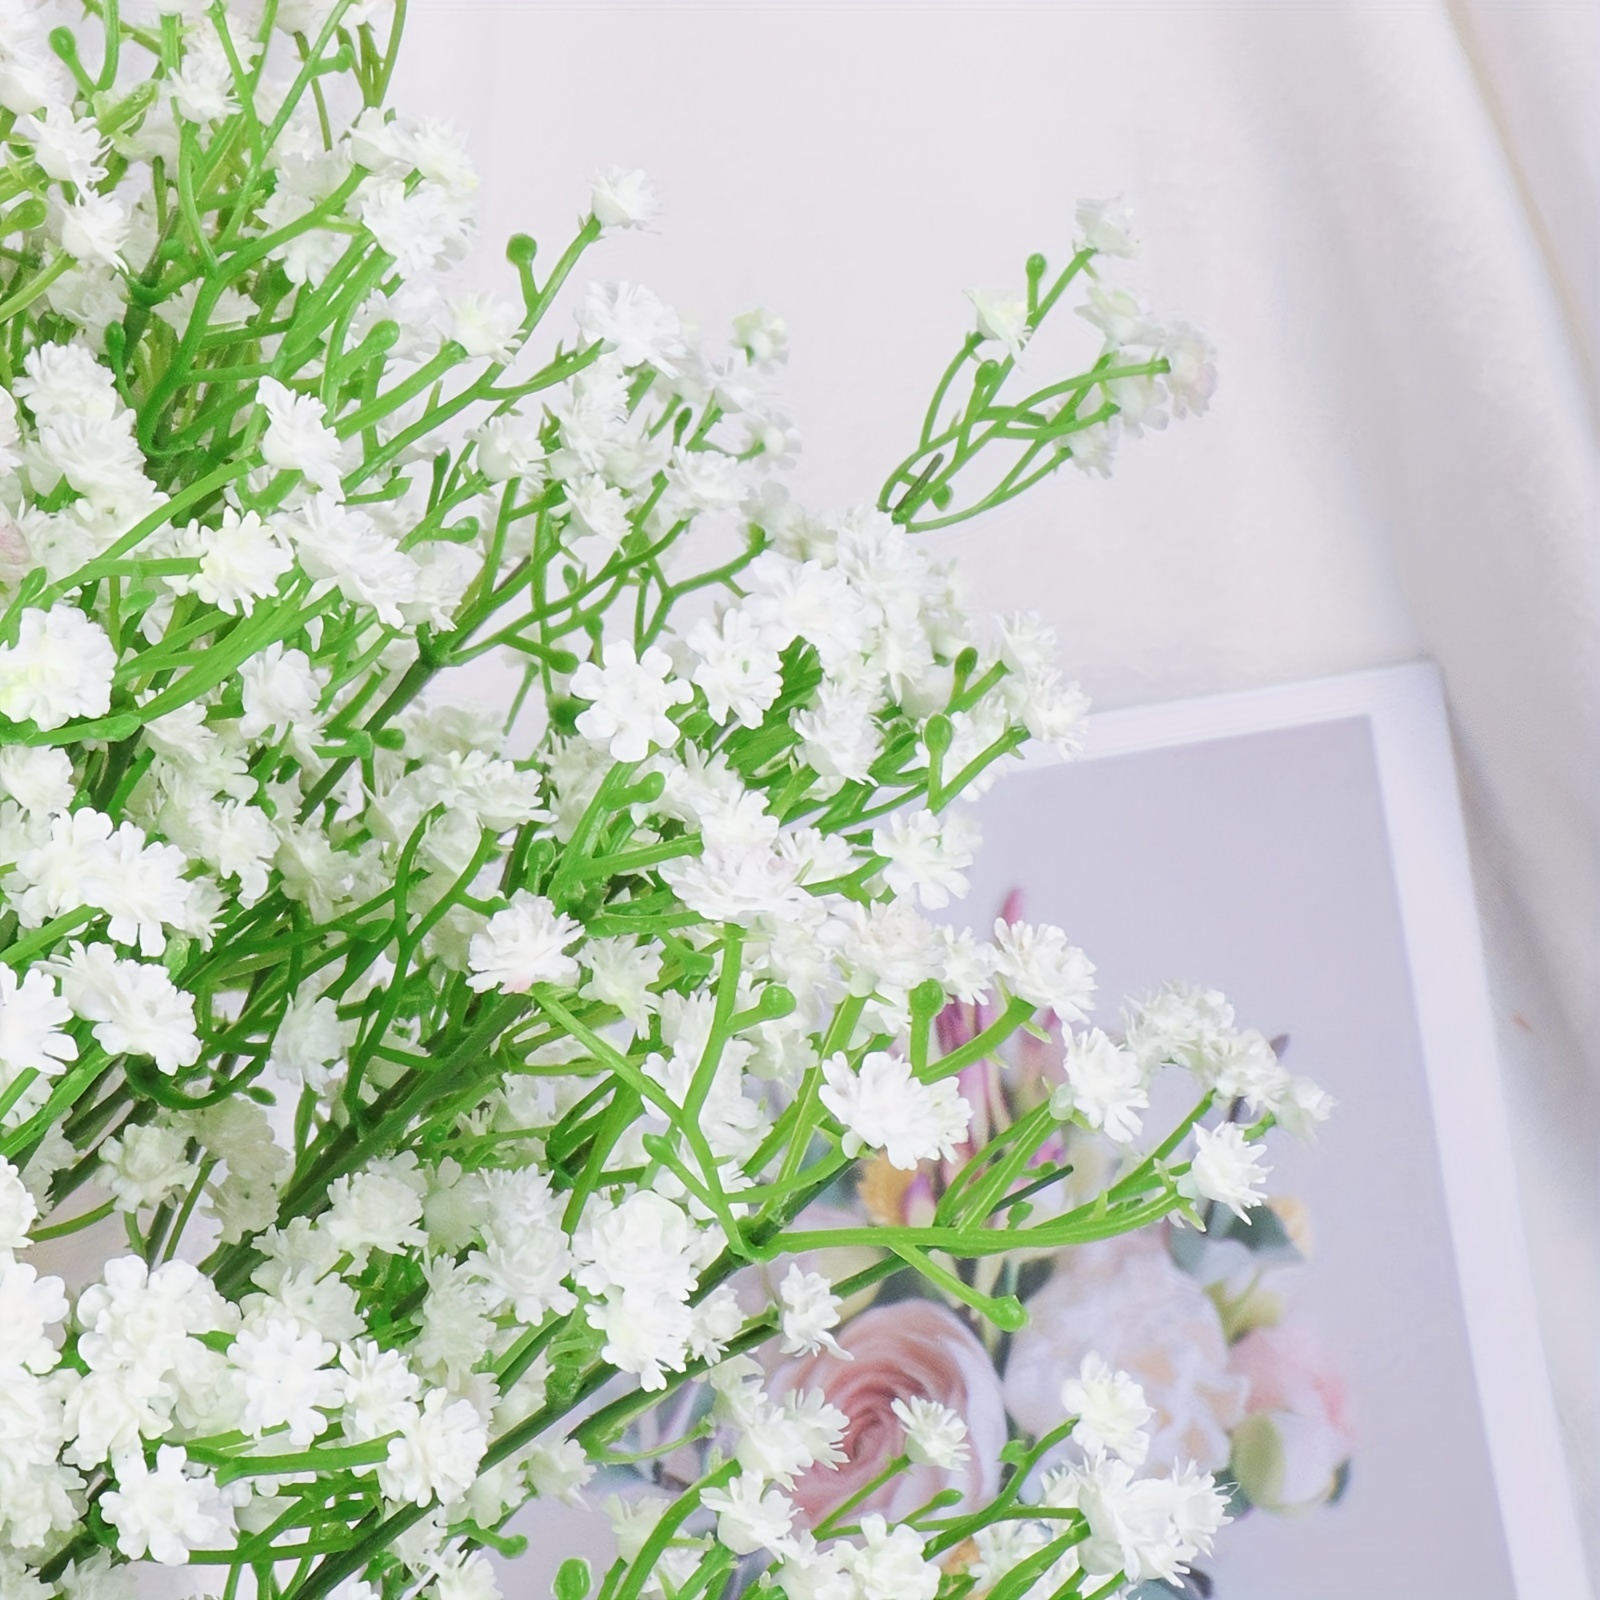 Faux Green and White Baby's Breath Flower Bouquet + Reviews